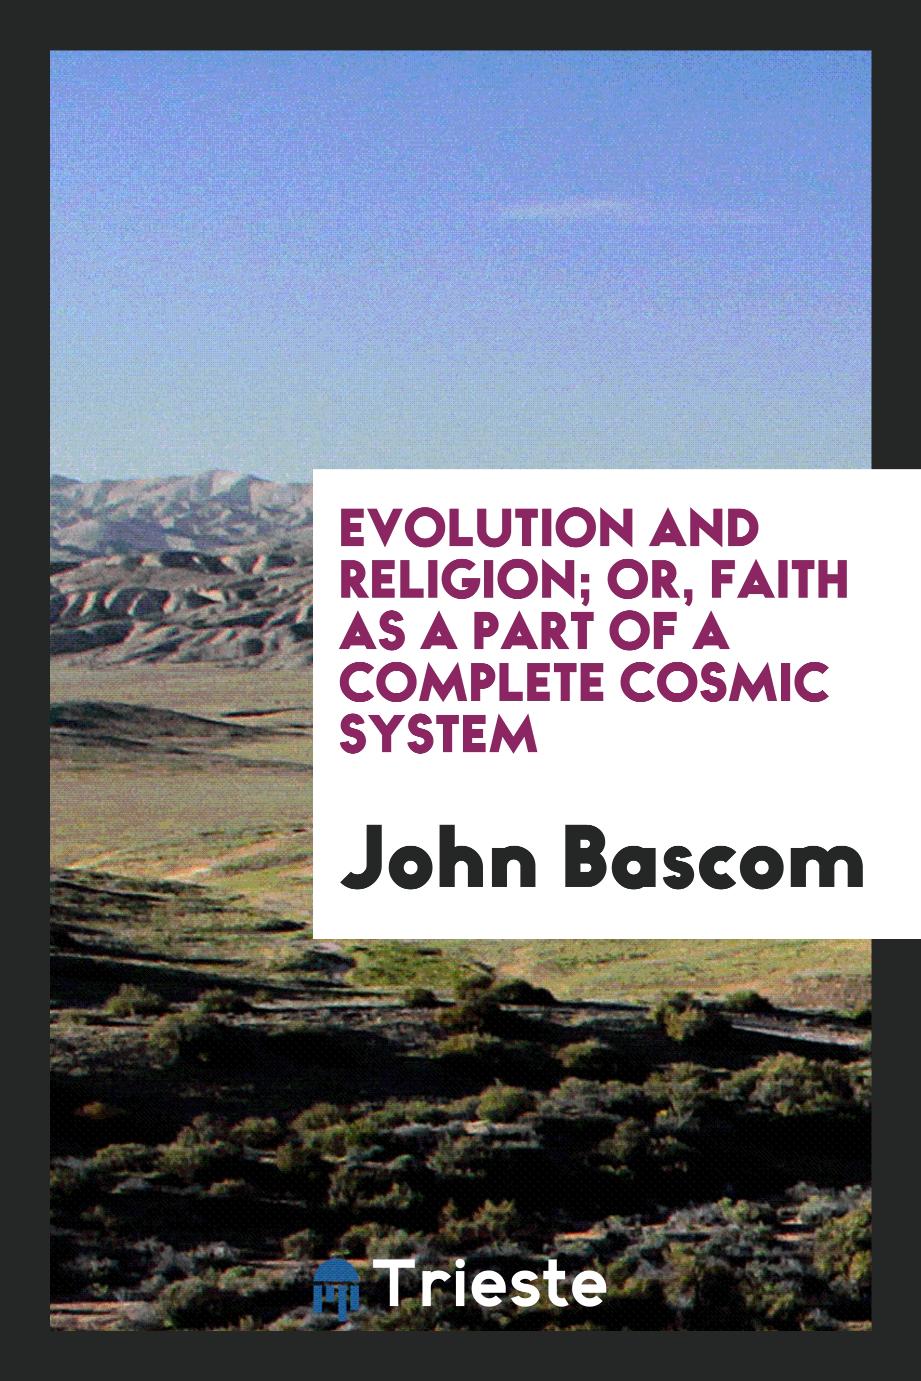 Evolution and religion; or, Faith as a part of a complete cosmic system